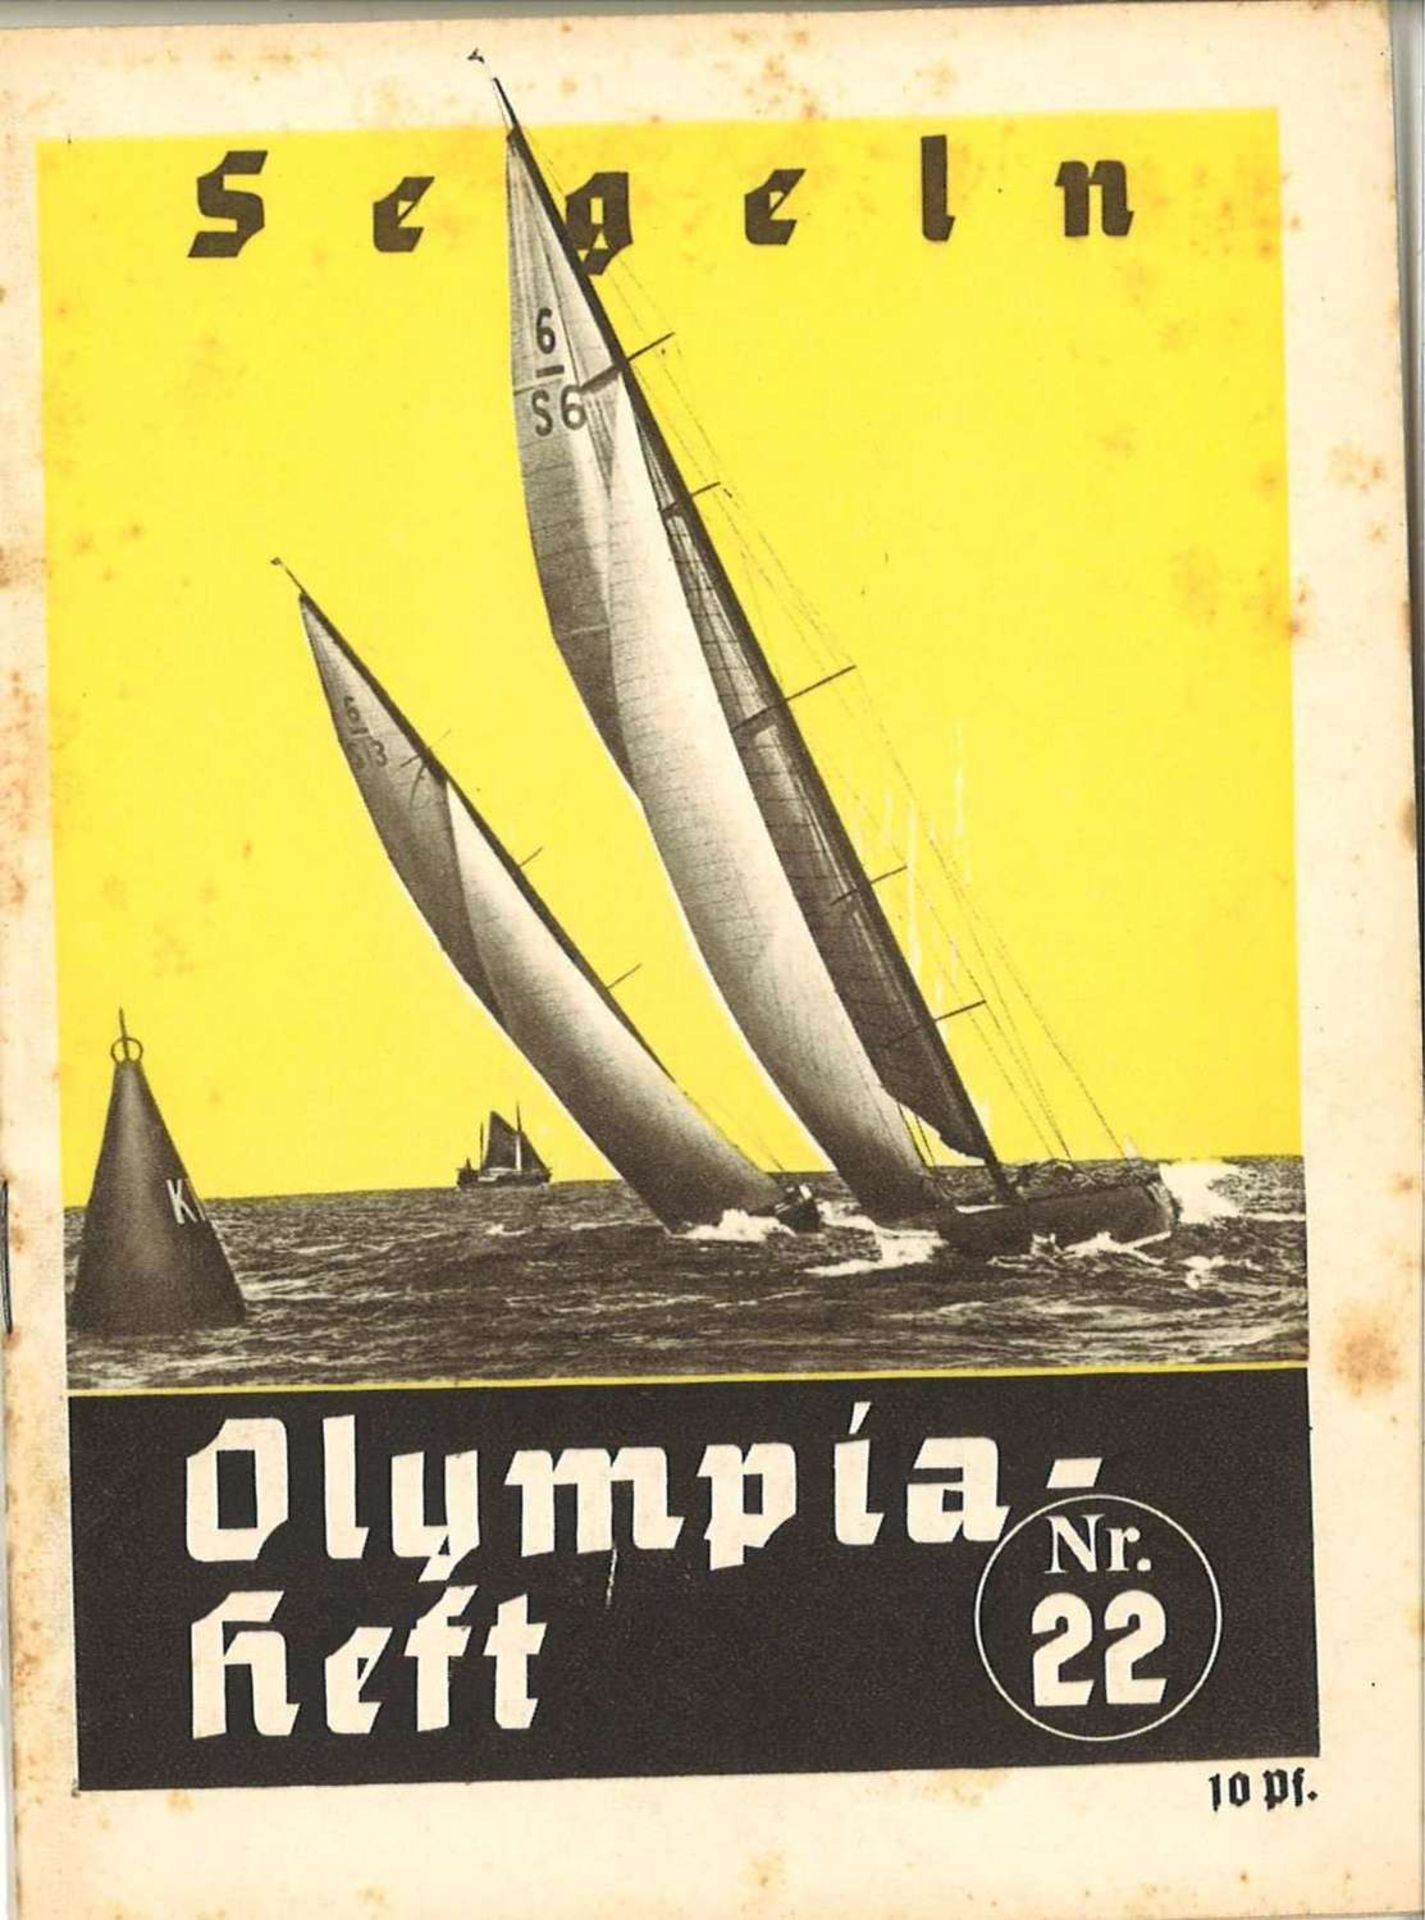 Berlin 1936, Olympia-Heft, 32 Seiten, Segeln Nr. 22Berlin 1936, Olympic booklet, 32 pages, sailing